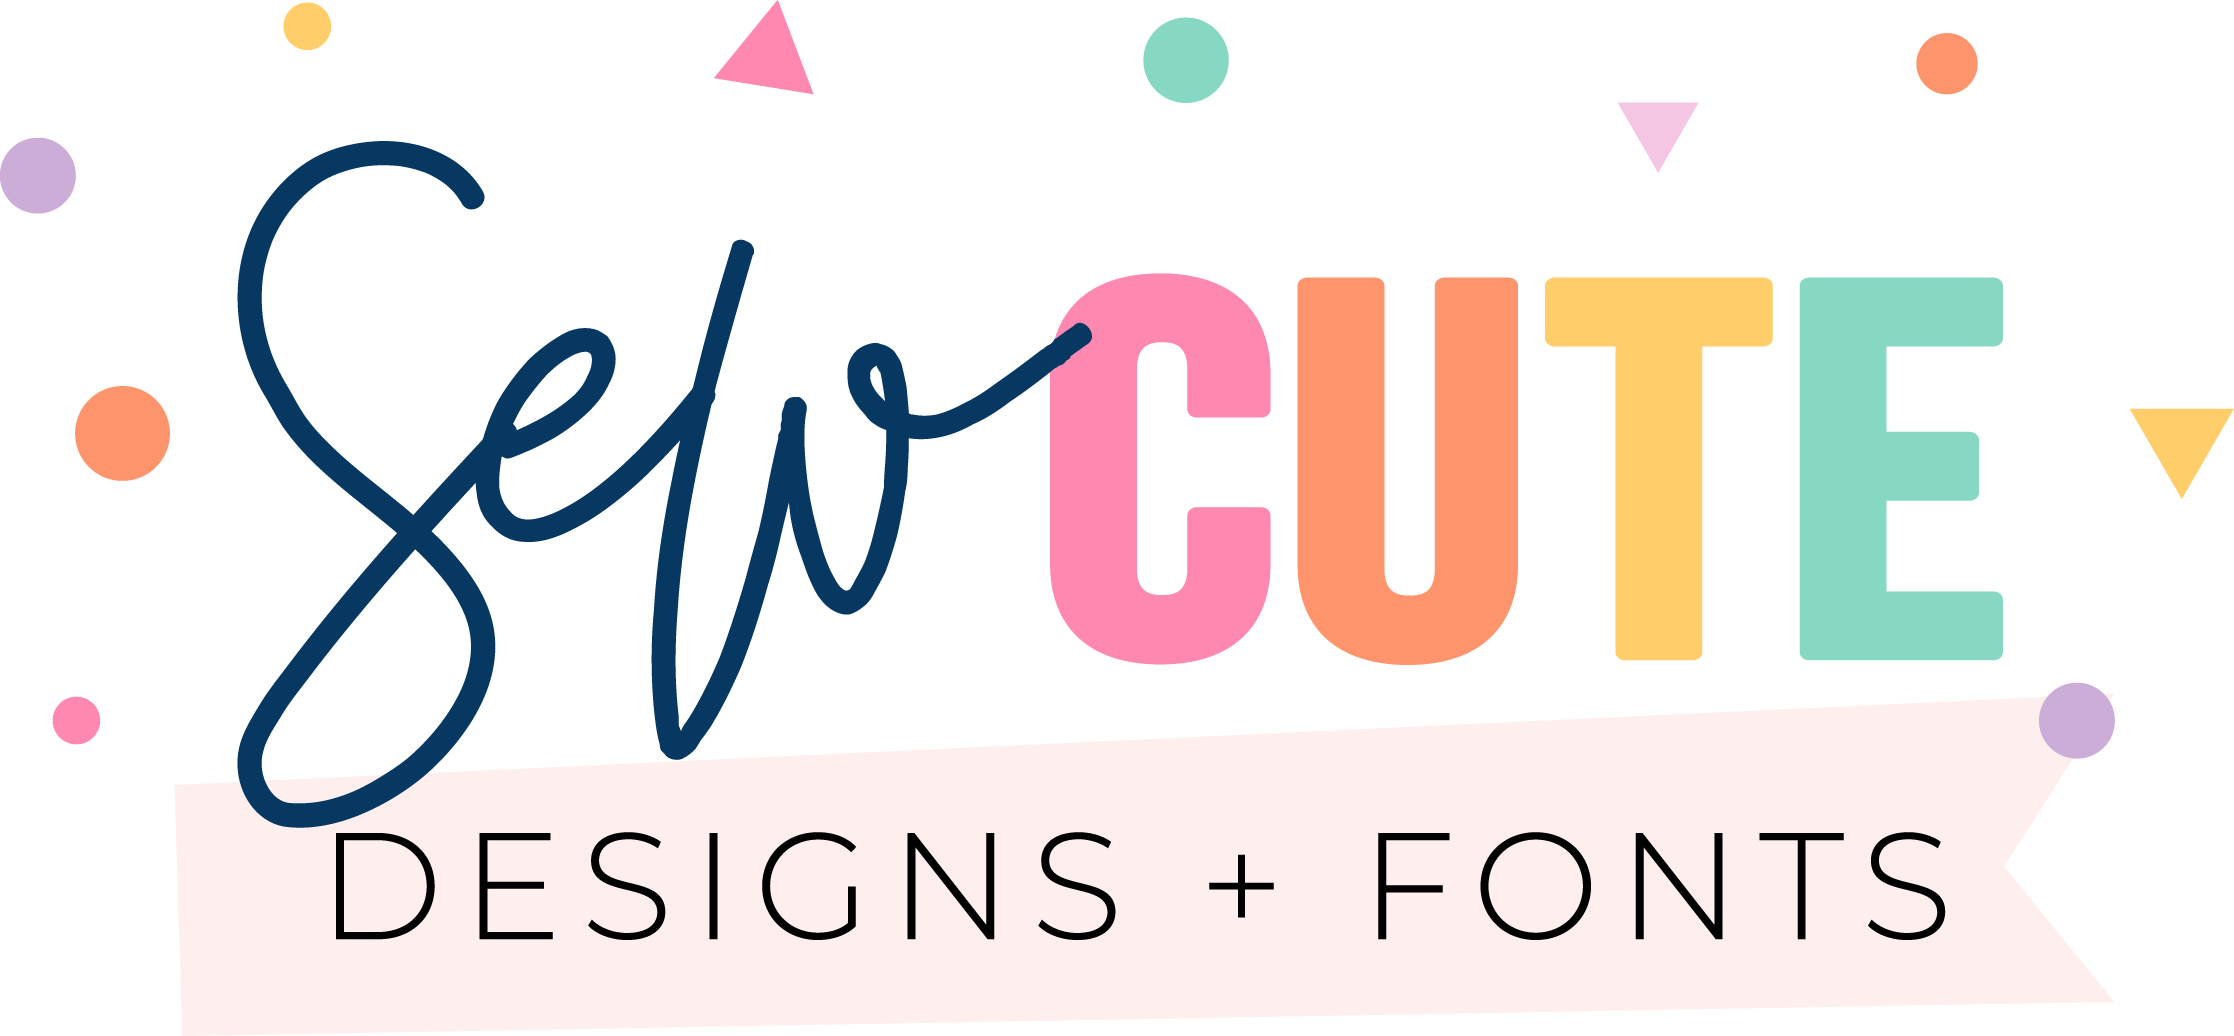 Terms + Conditions – Sew Cute Designs + Fonts